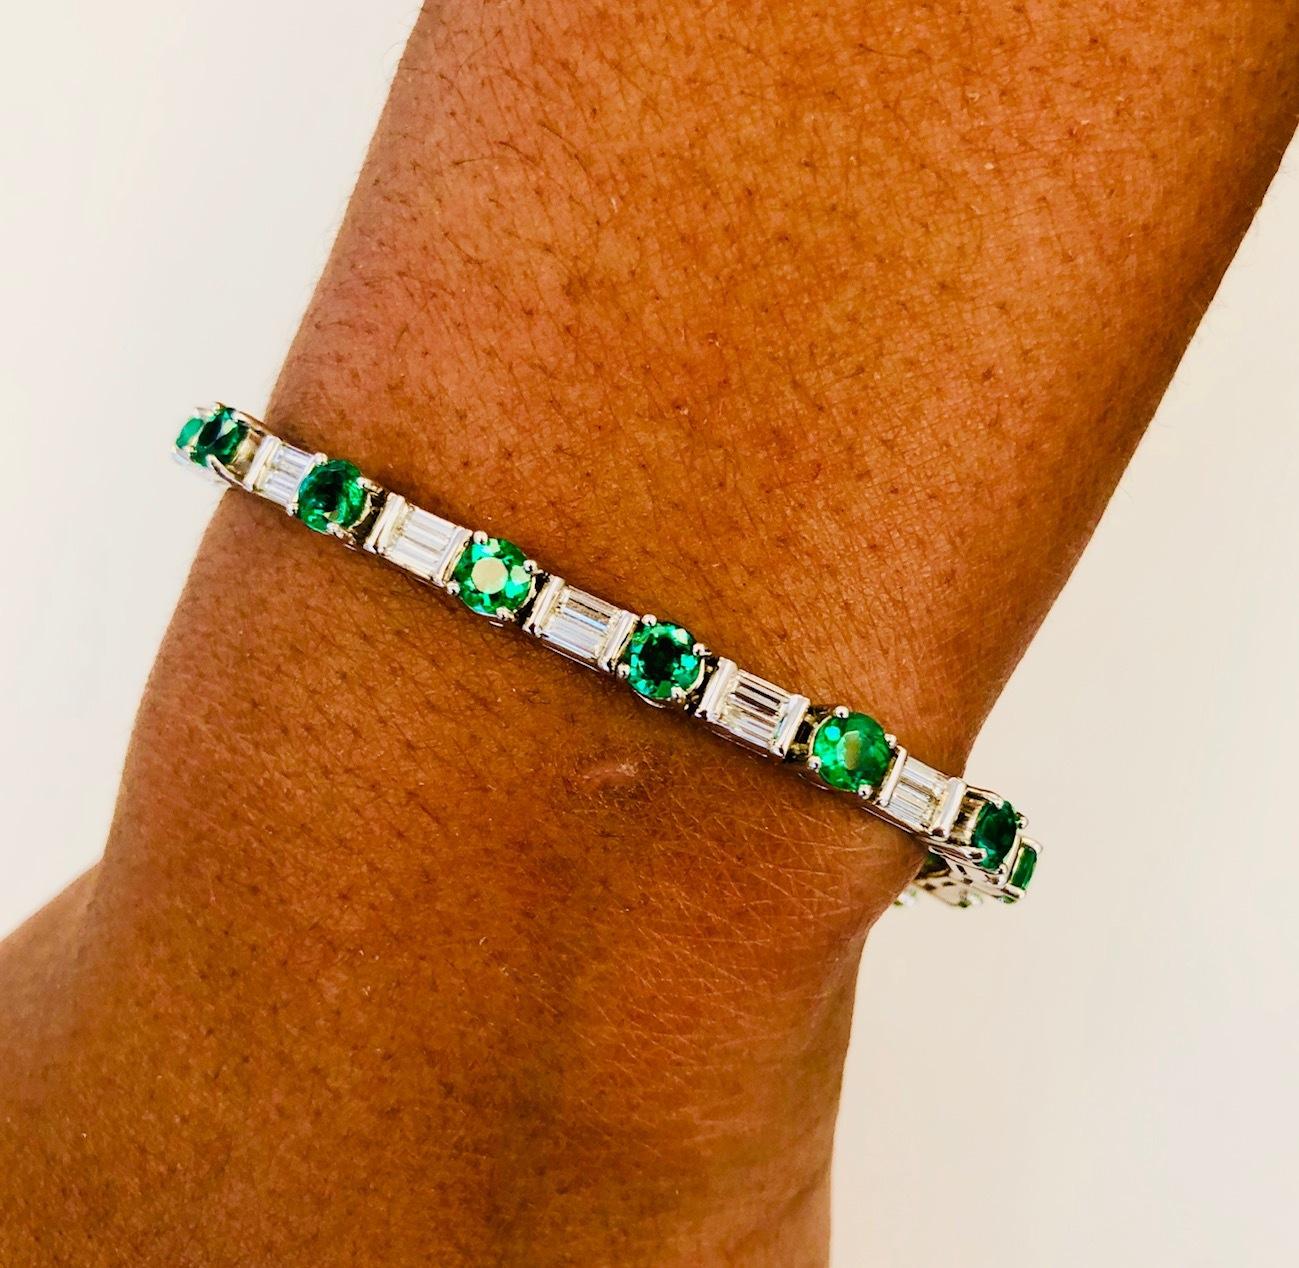 Fine quality line Bracelet made in Platinum, set with 34 Extra Fine Emeralds 4.62 carats and 34 fine Baguette Diamonds 2.81 carats. The beauty of this Bracelets is the high quality and perfect matching of the Emeralds.
Also available set with All